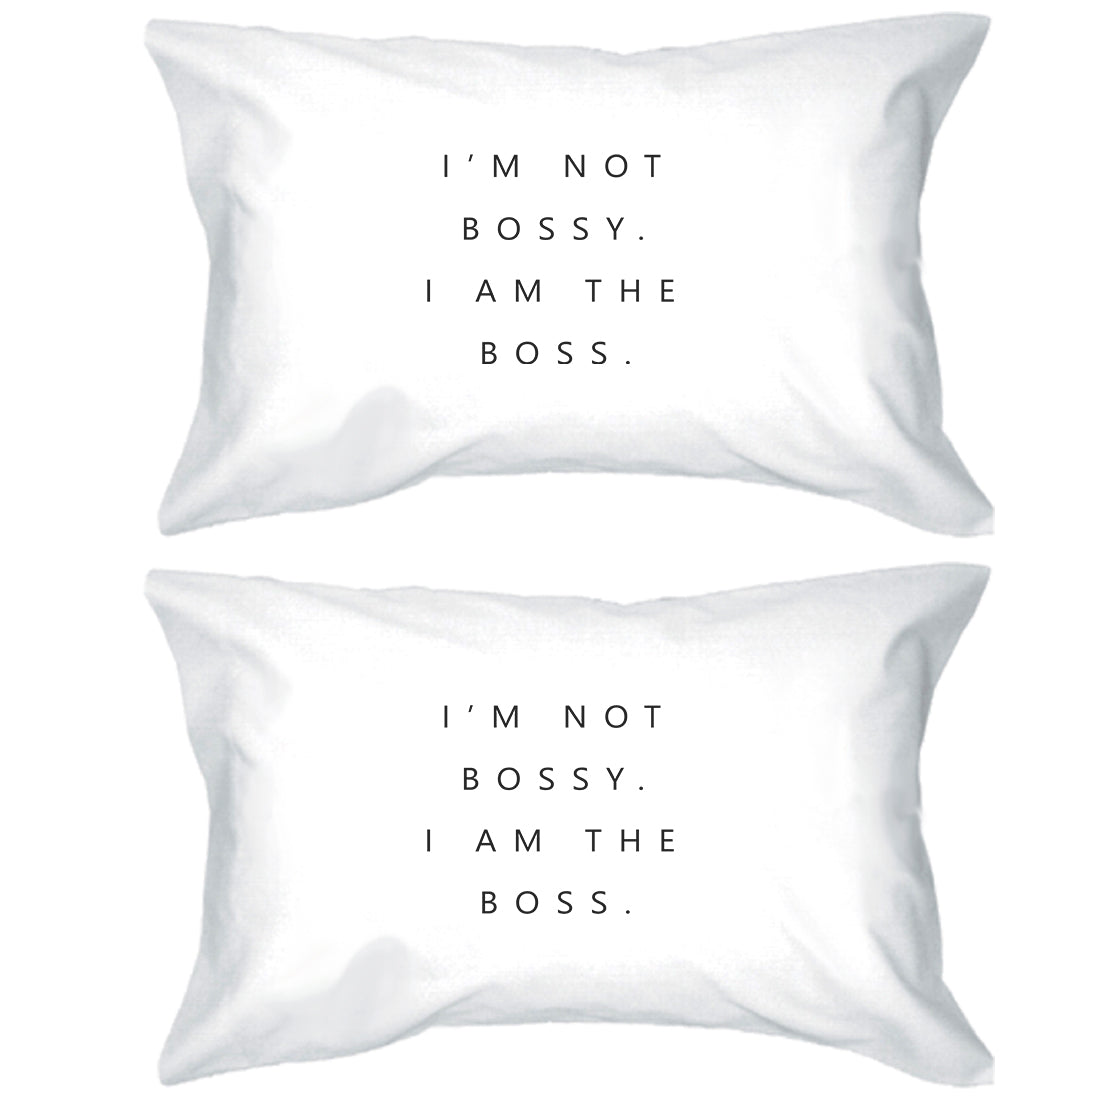 Bossy Boss Pillowcases Standard Size Pillow Covers Newlywed Gifts White